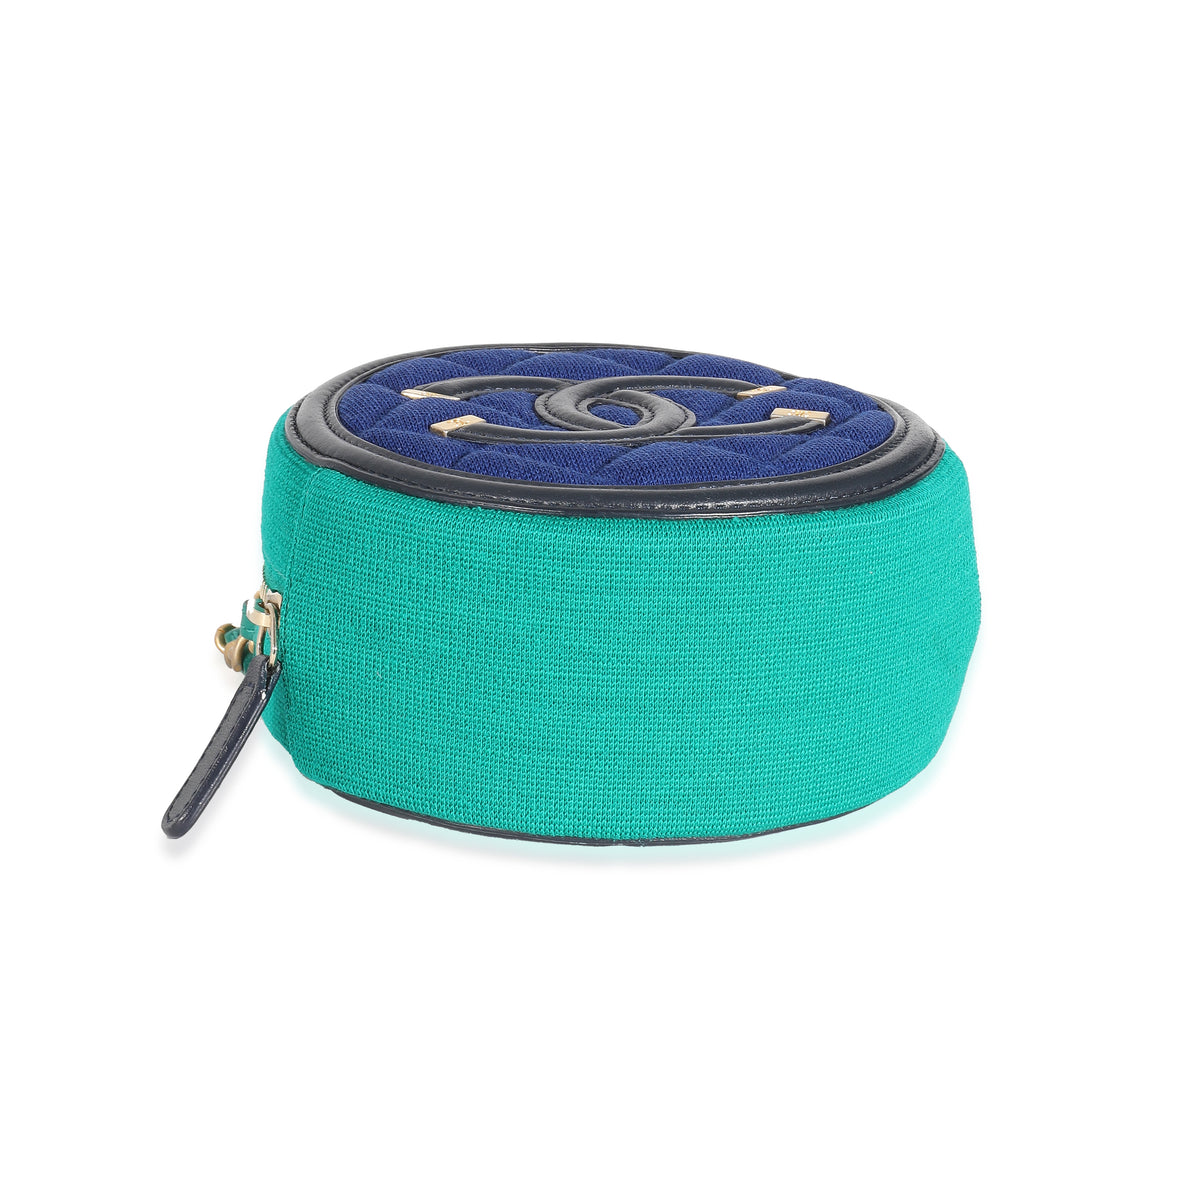 Chanel Blue Green Jersey Quilted Filigree Round Clutch